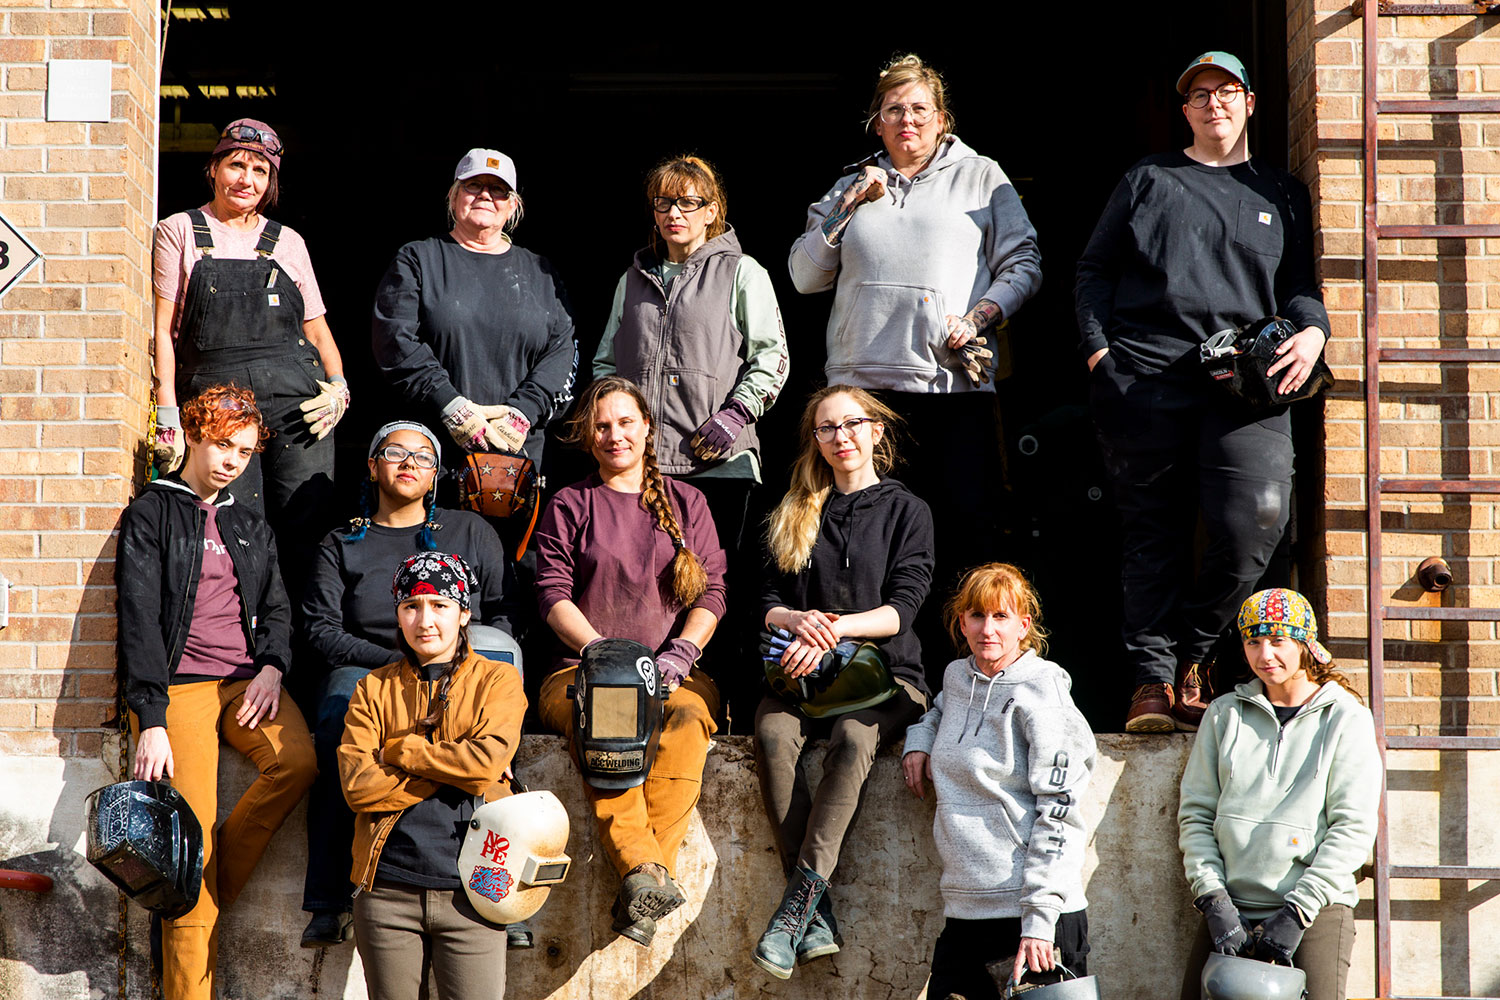 Austin Community College / Women in Construction / Crafted in Carhartt